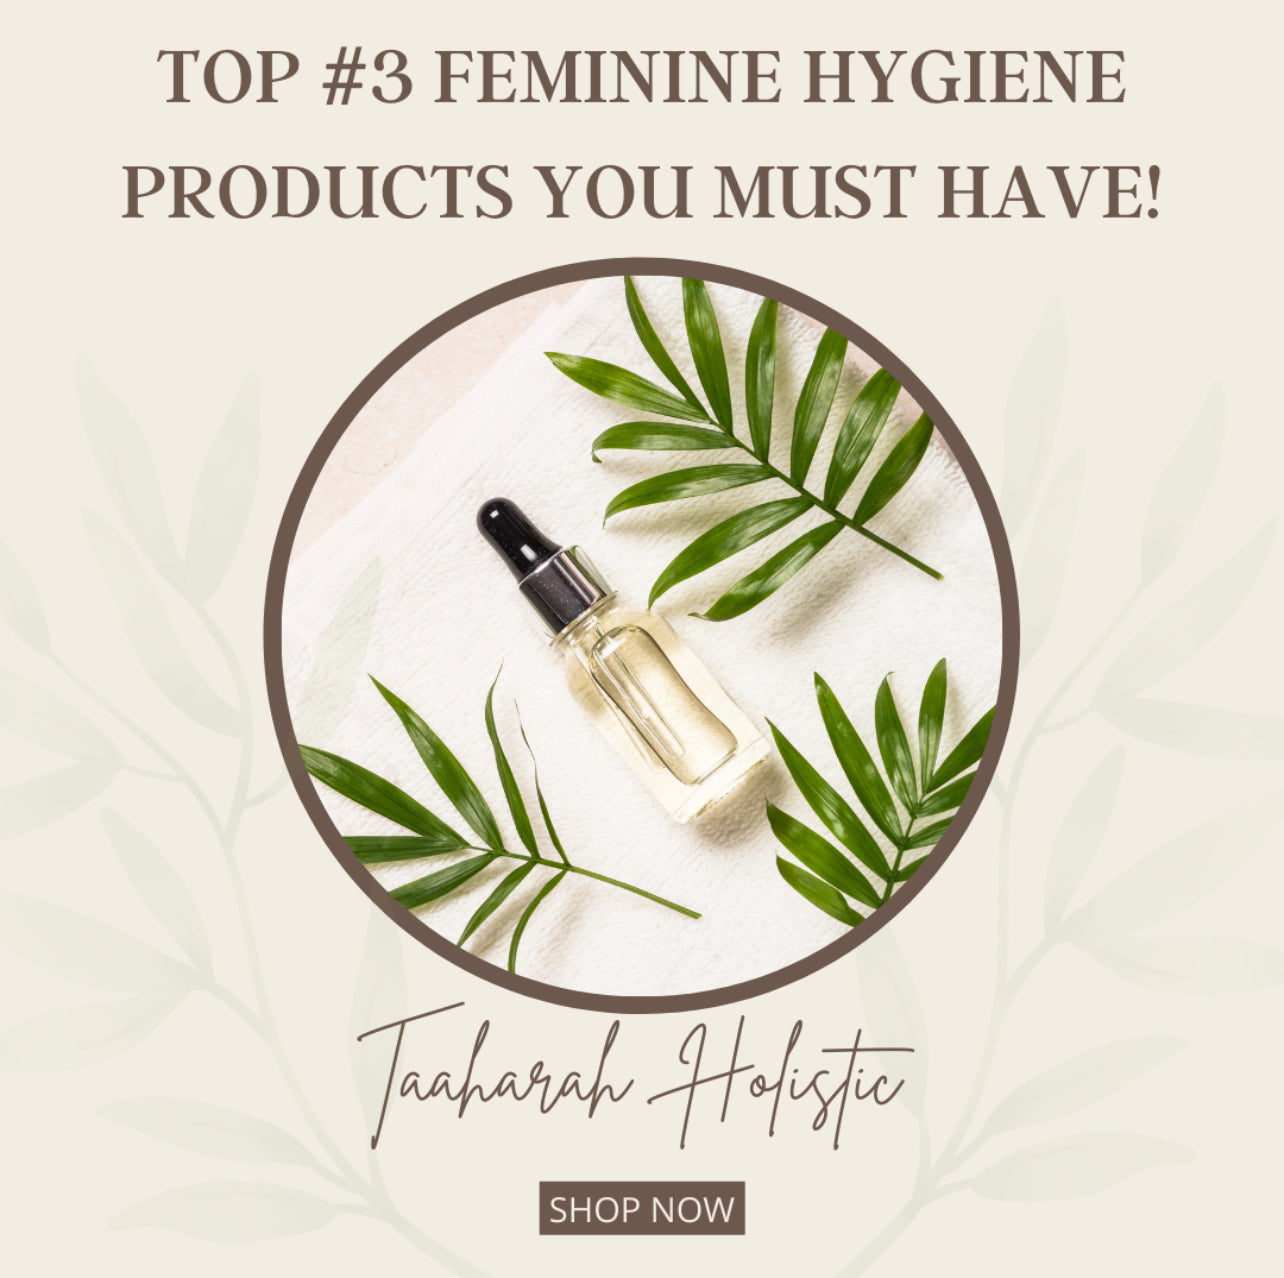 Top #3 Feminine Hygiene Products You Must Have!